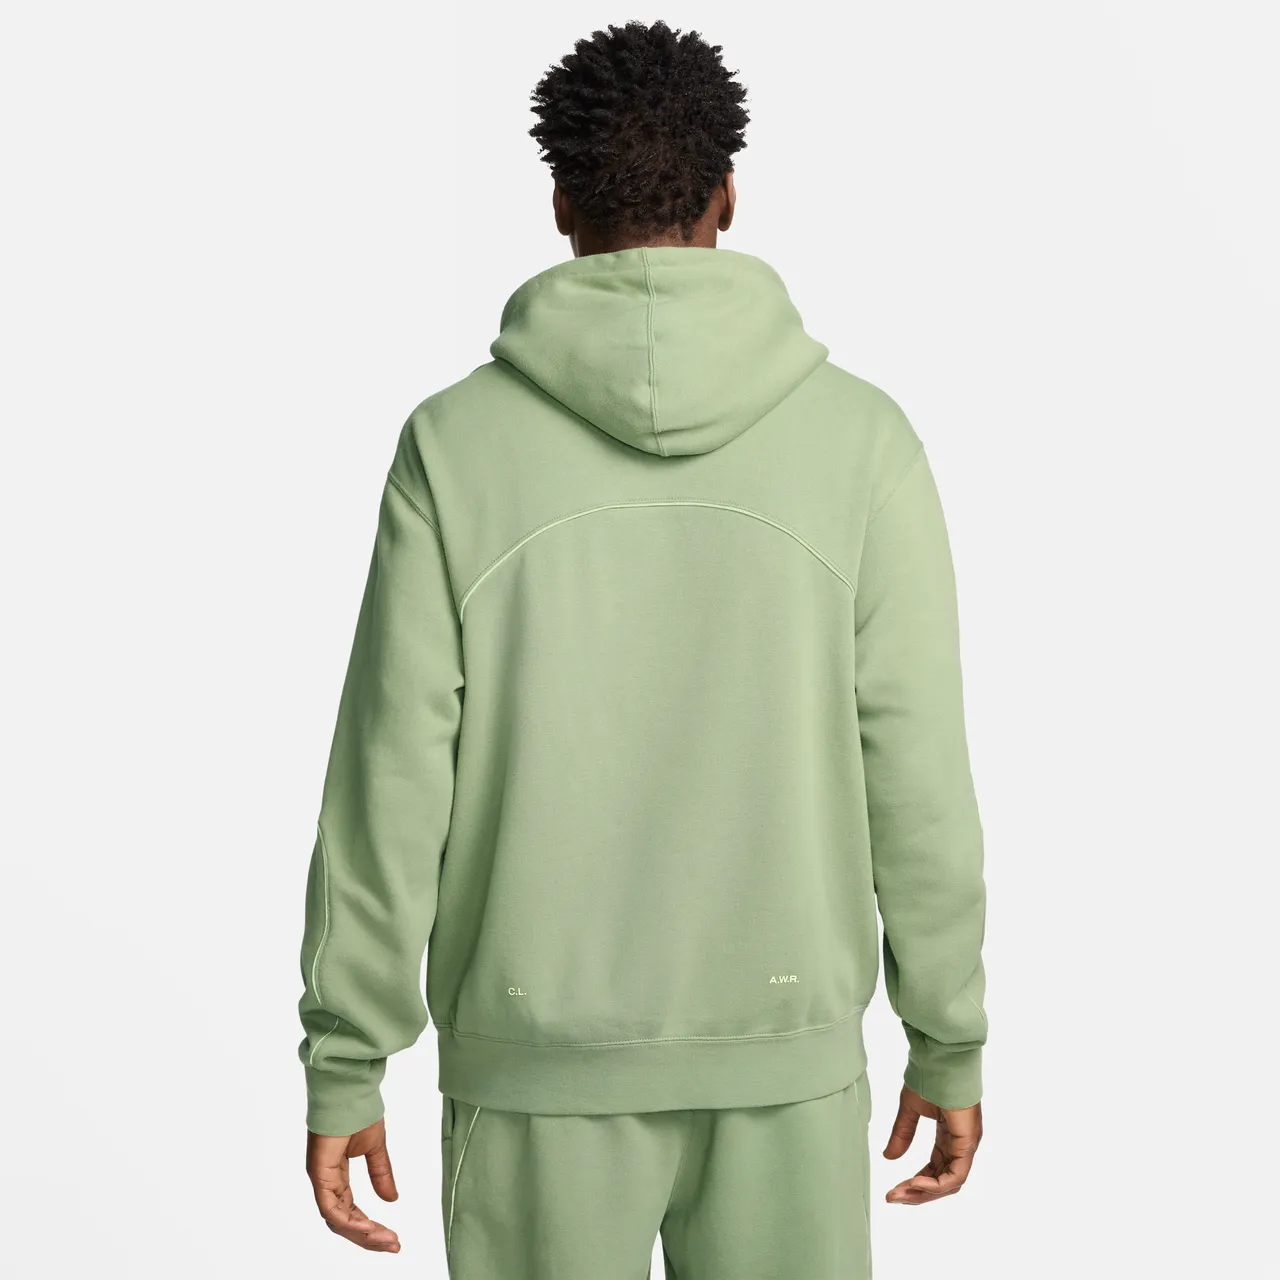 NOCTA Hoodie - Green - Polyester